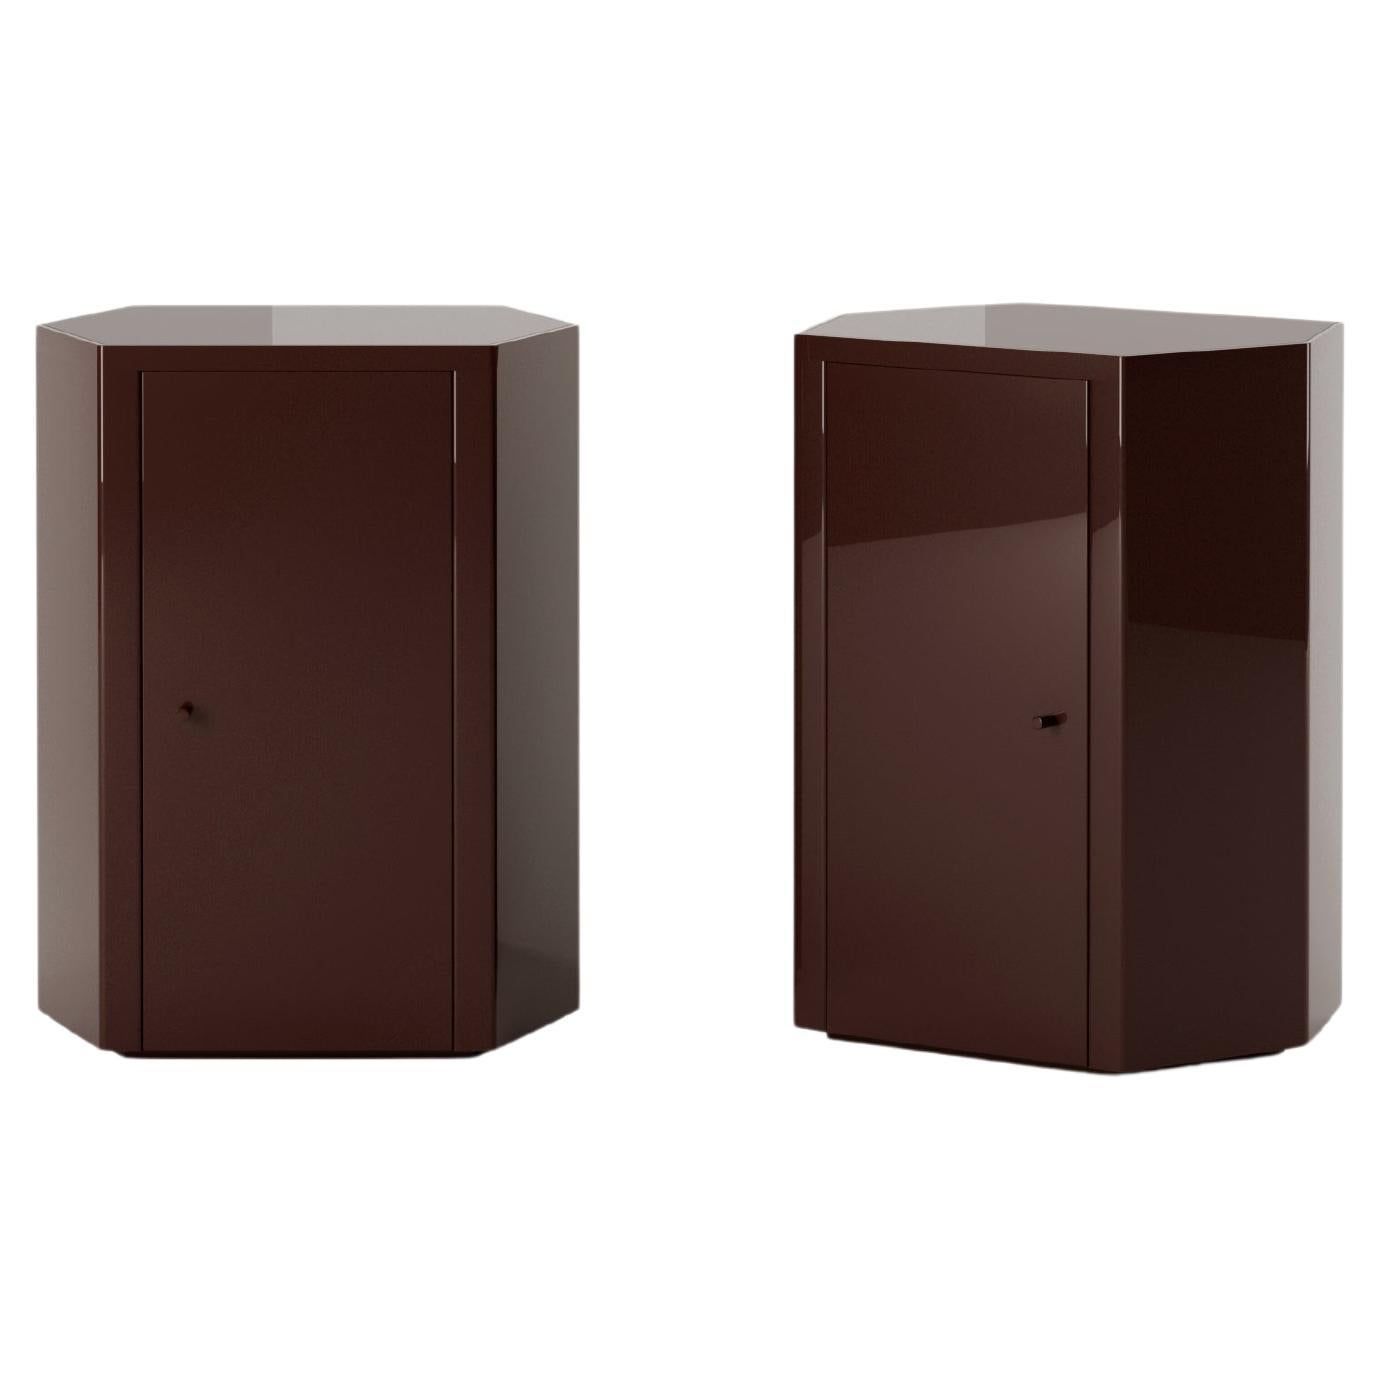 Pair of Park Night Stands in Espresso Brown Lacquer by Yaniv Chen for Lemon For Sale